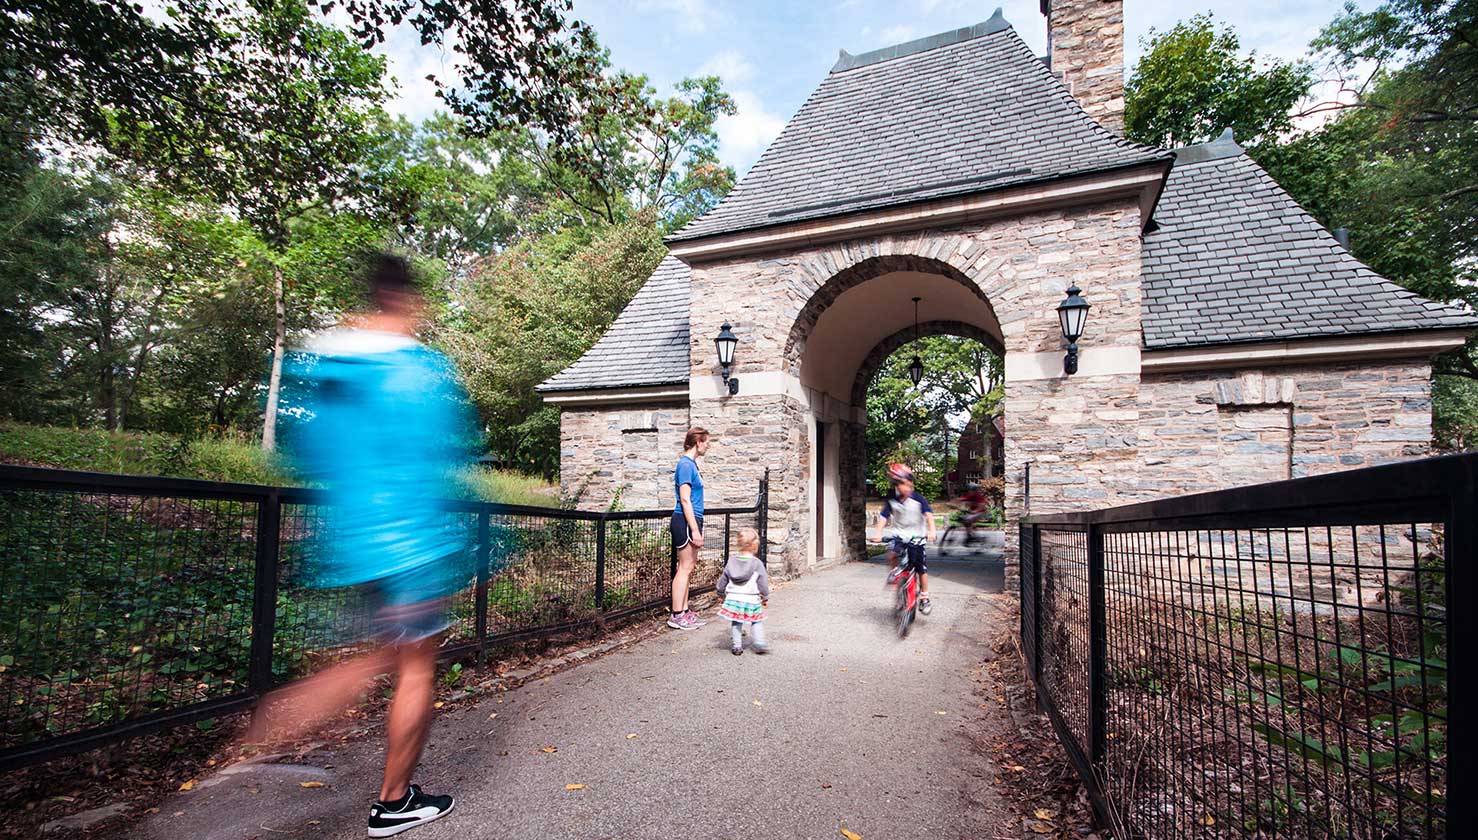 Frick Park's stone gatehouse with people walking and biking through